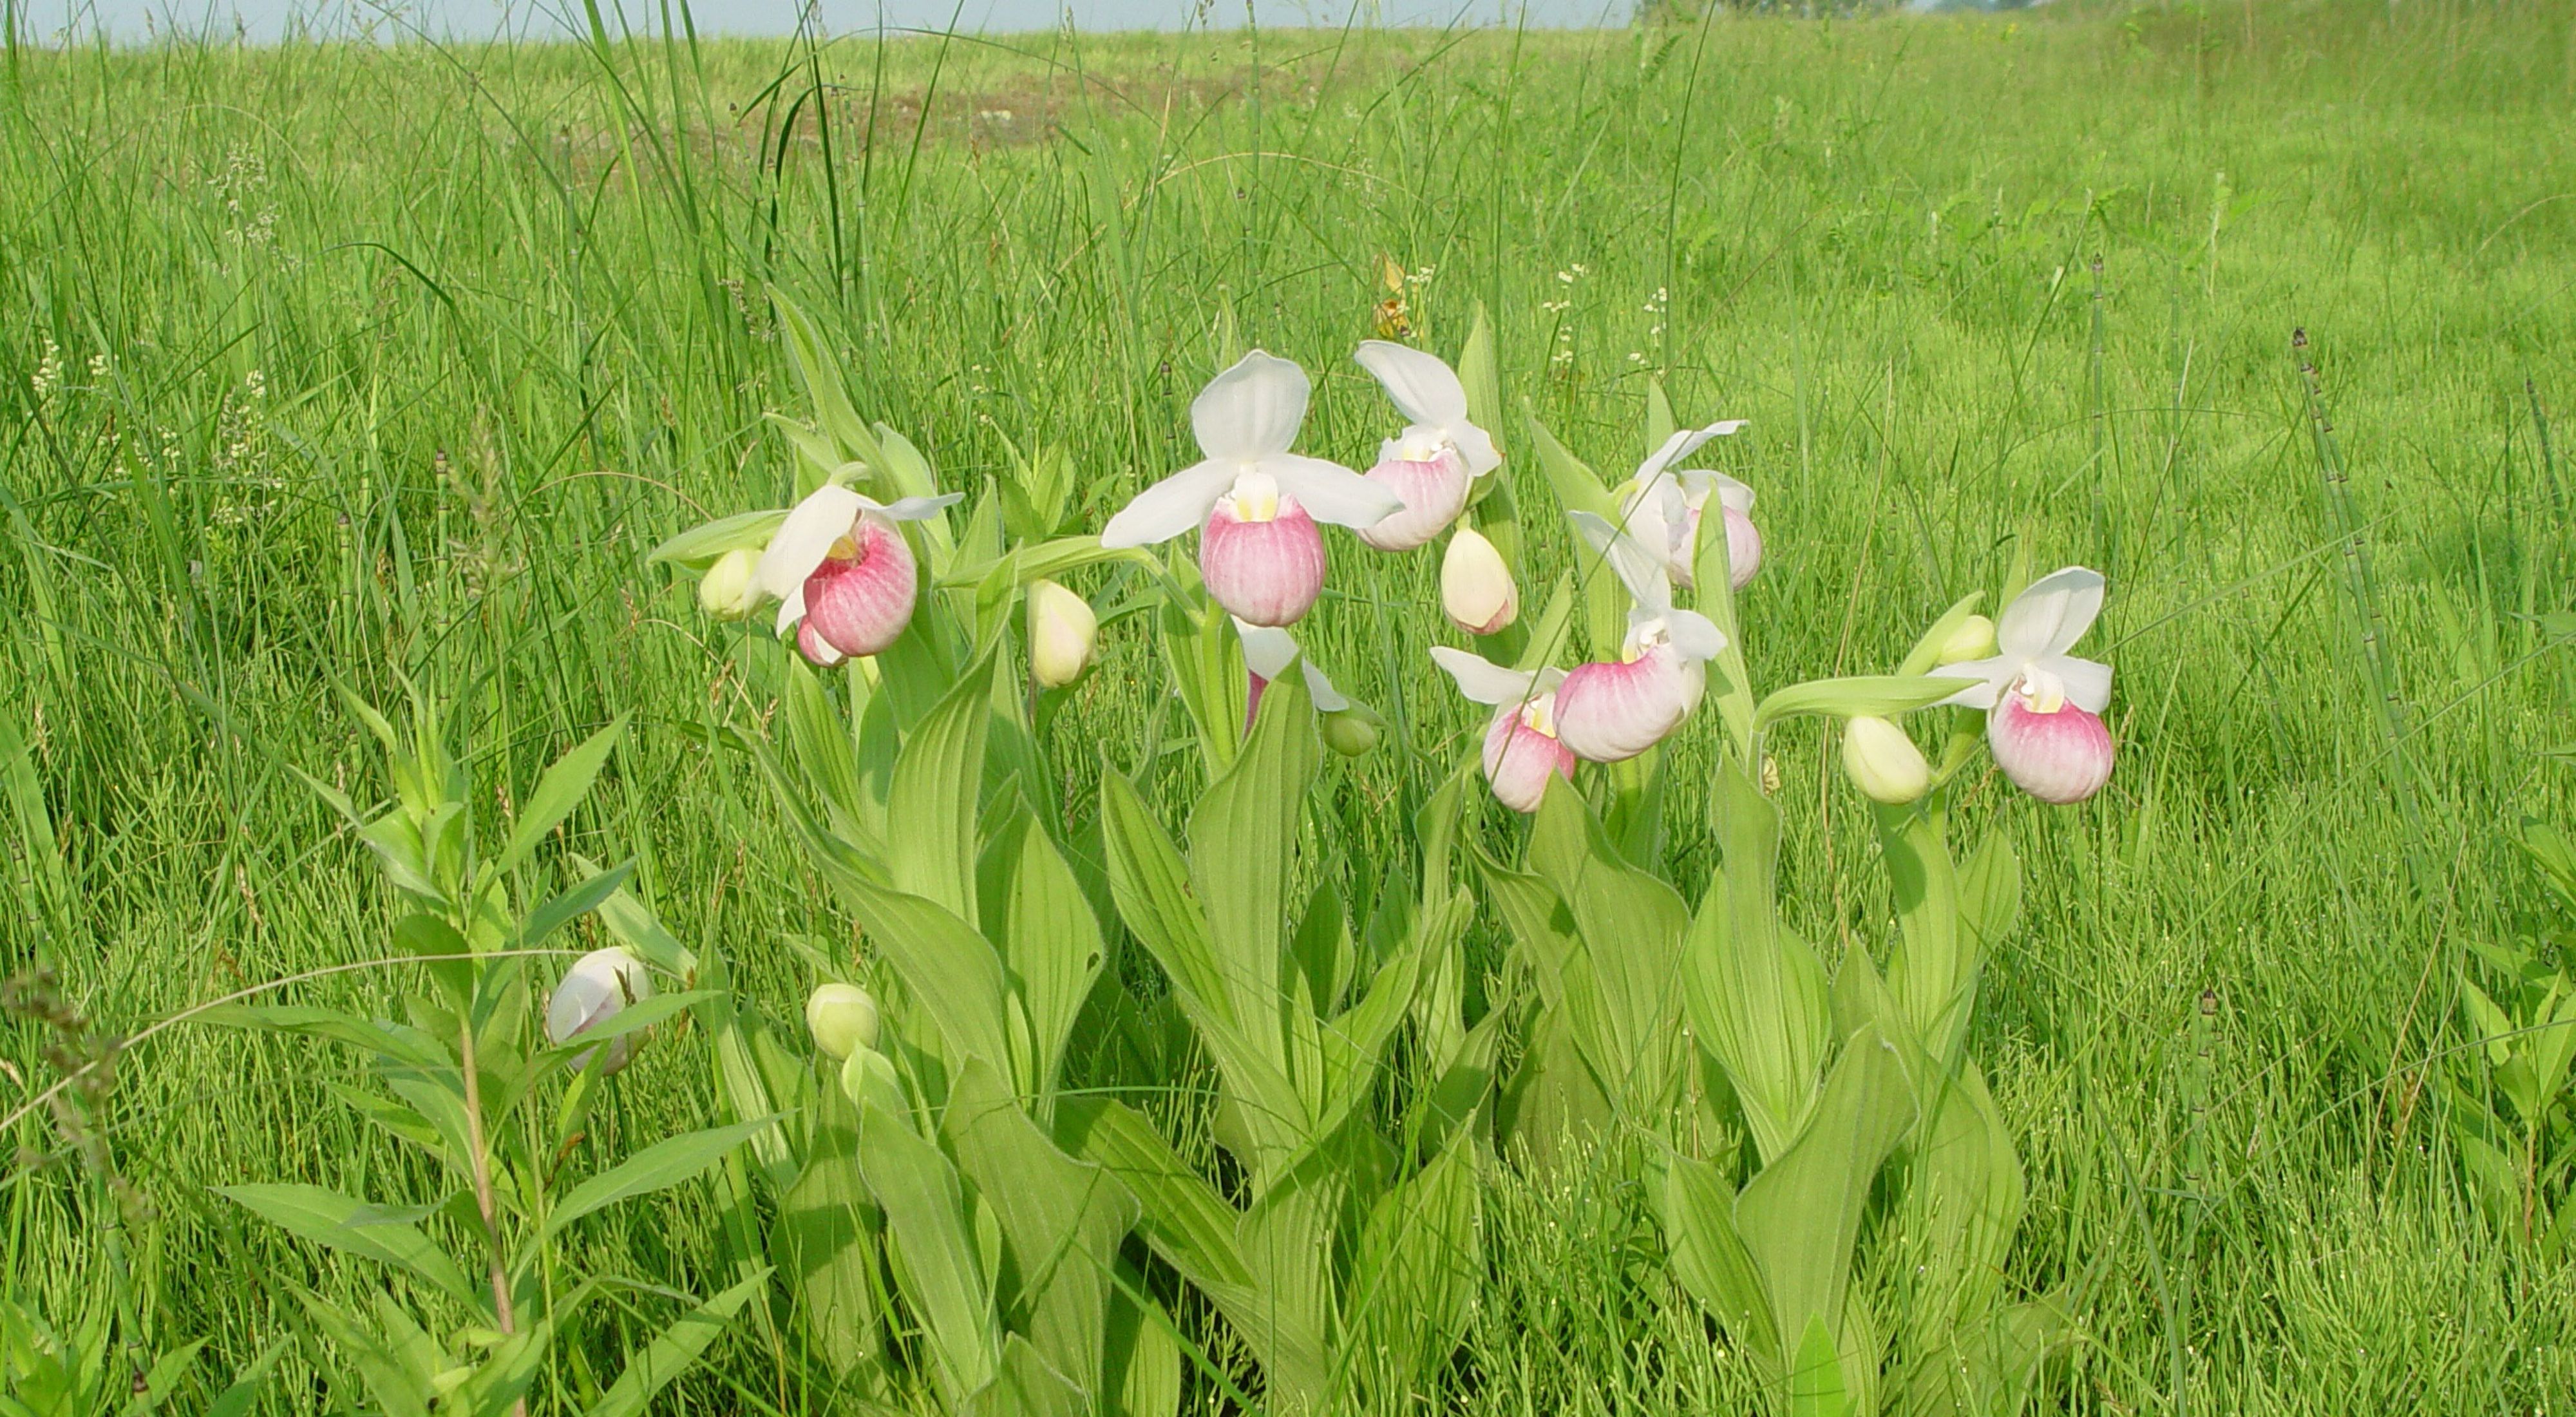 Showy pink lady's slippers in bloom.